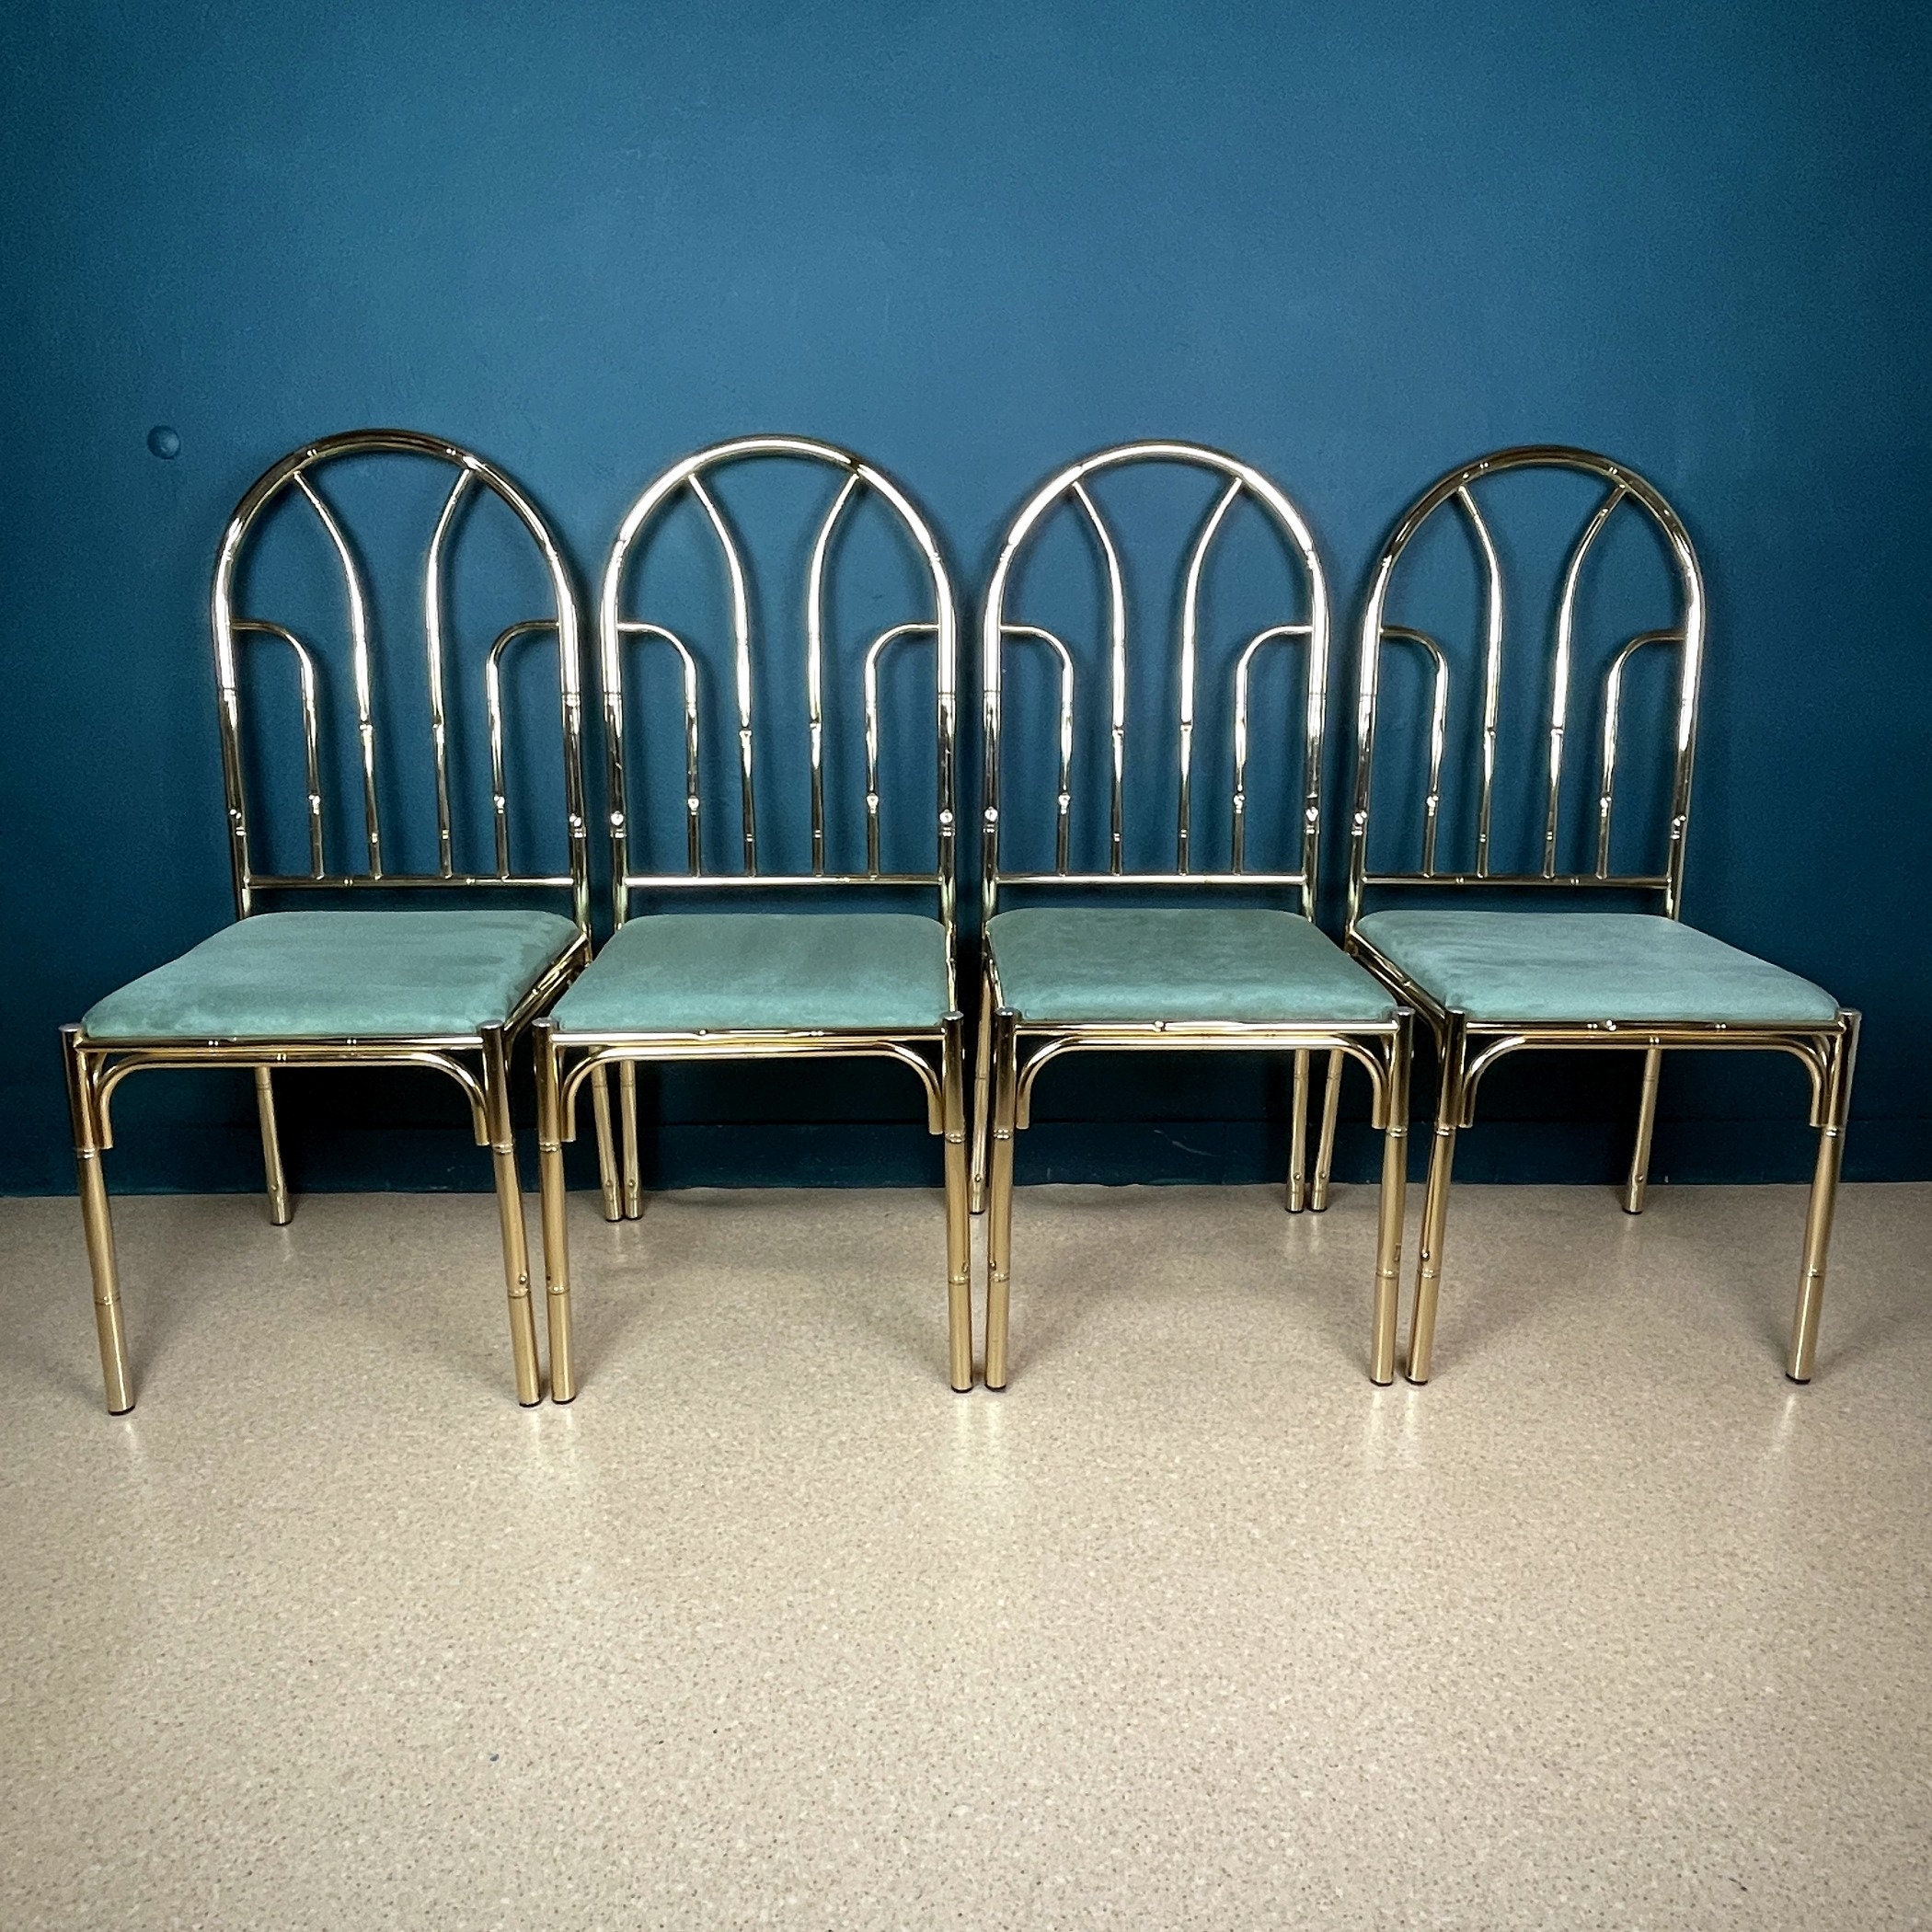 Set of Vintage Brass Faux Bamboo Dining 4 Chairs and Table France 1970s MCM  Modernist Hollywood Regency Retro -  Canada